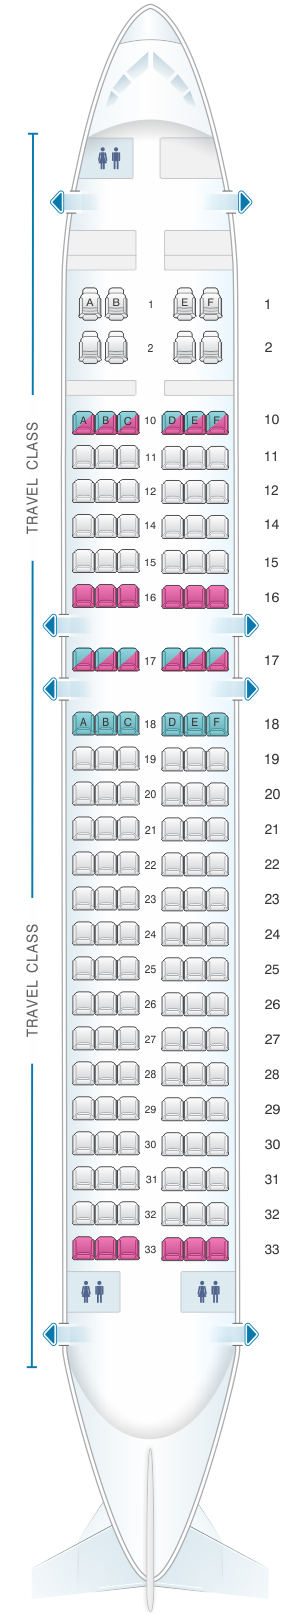 Seat map for Asiana Airlines Airbus A320 200 146PAX